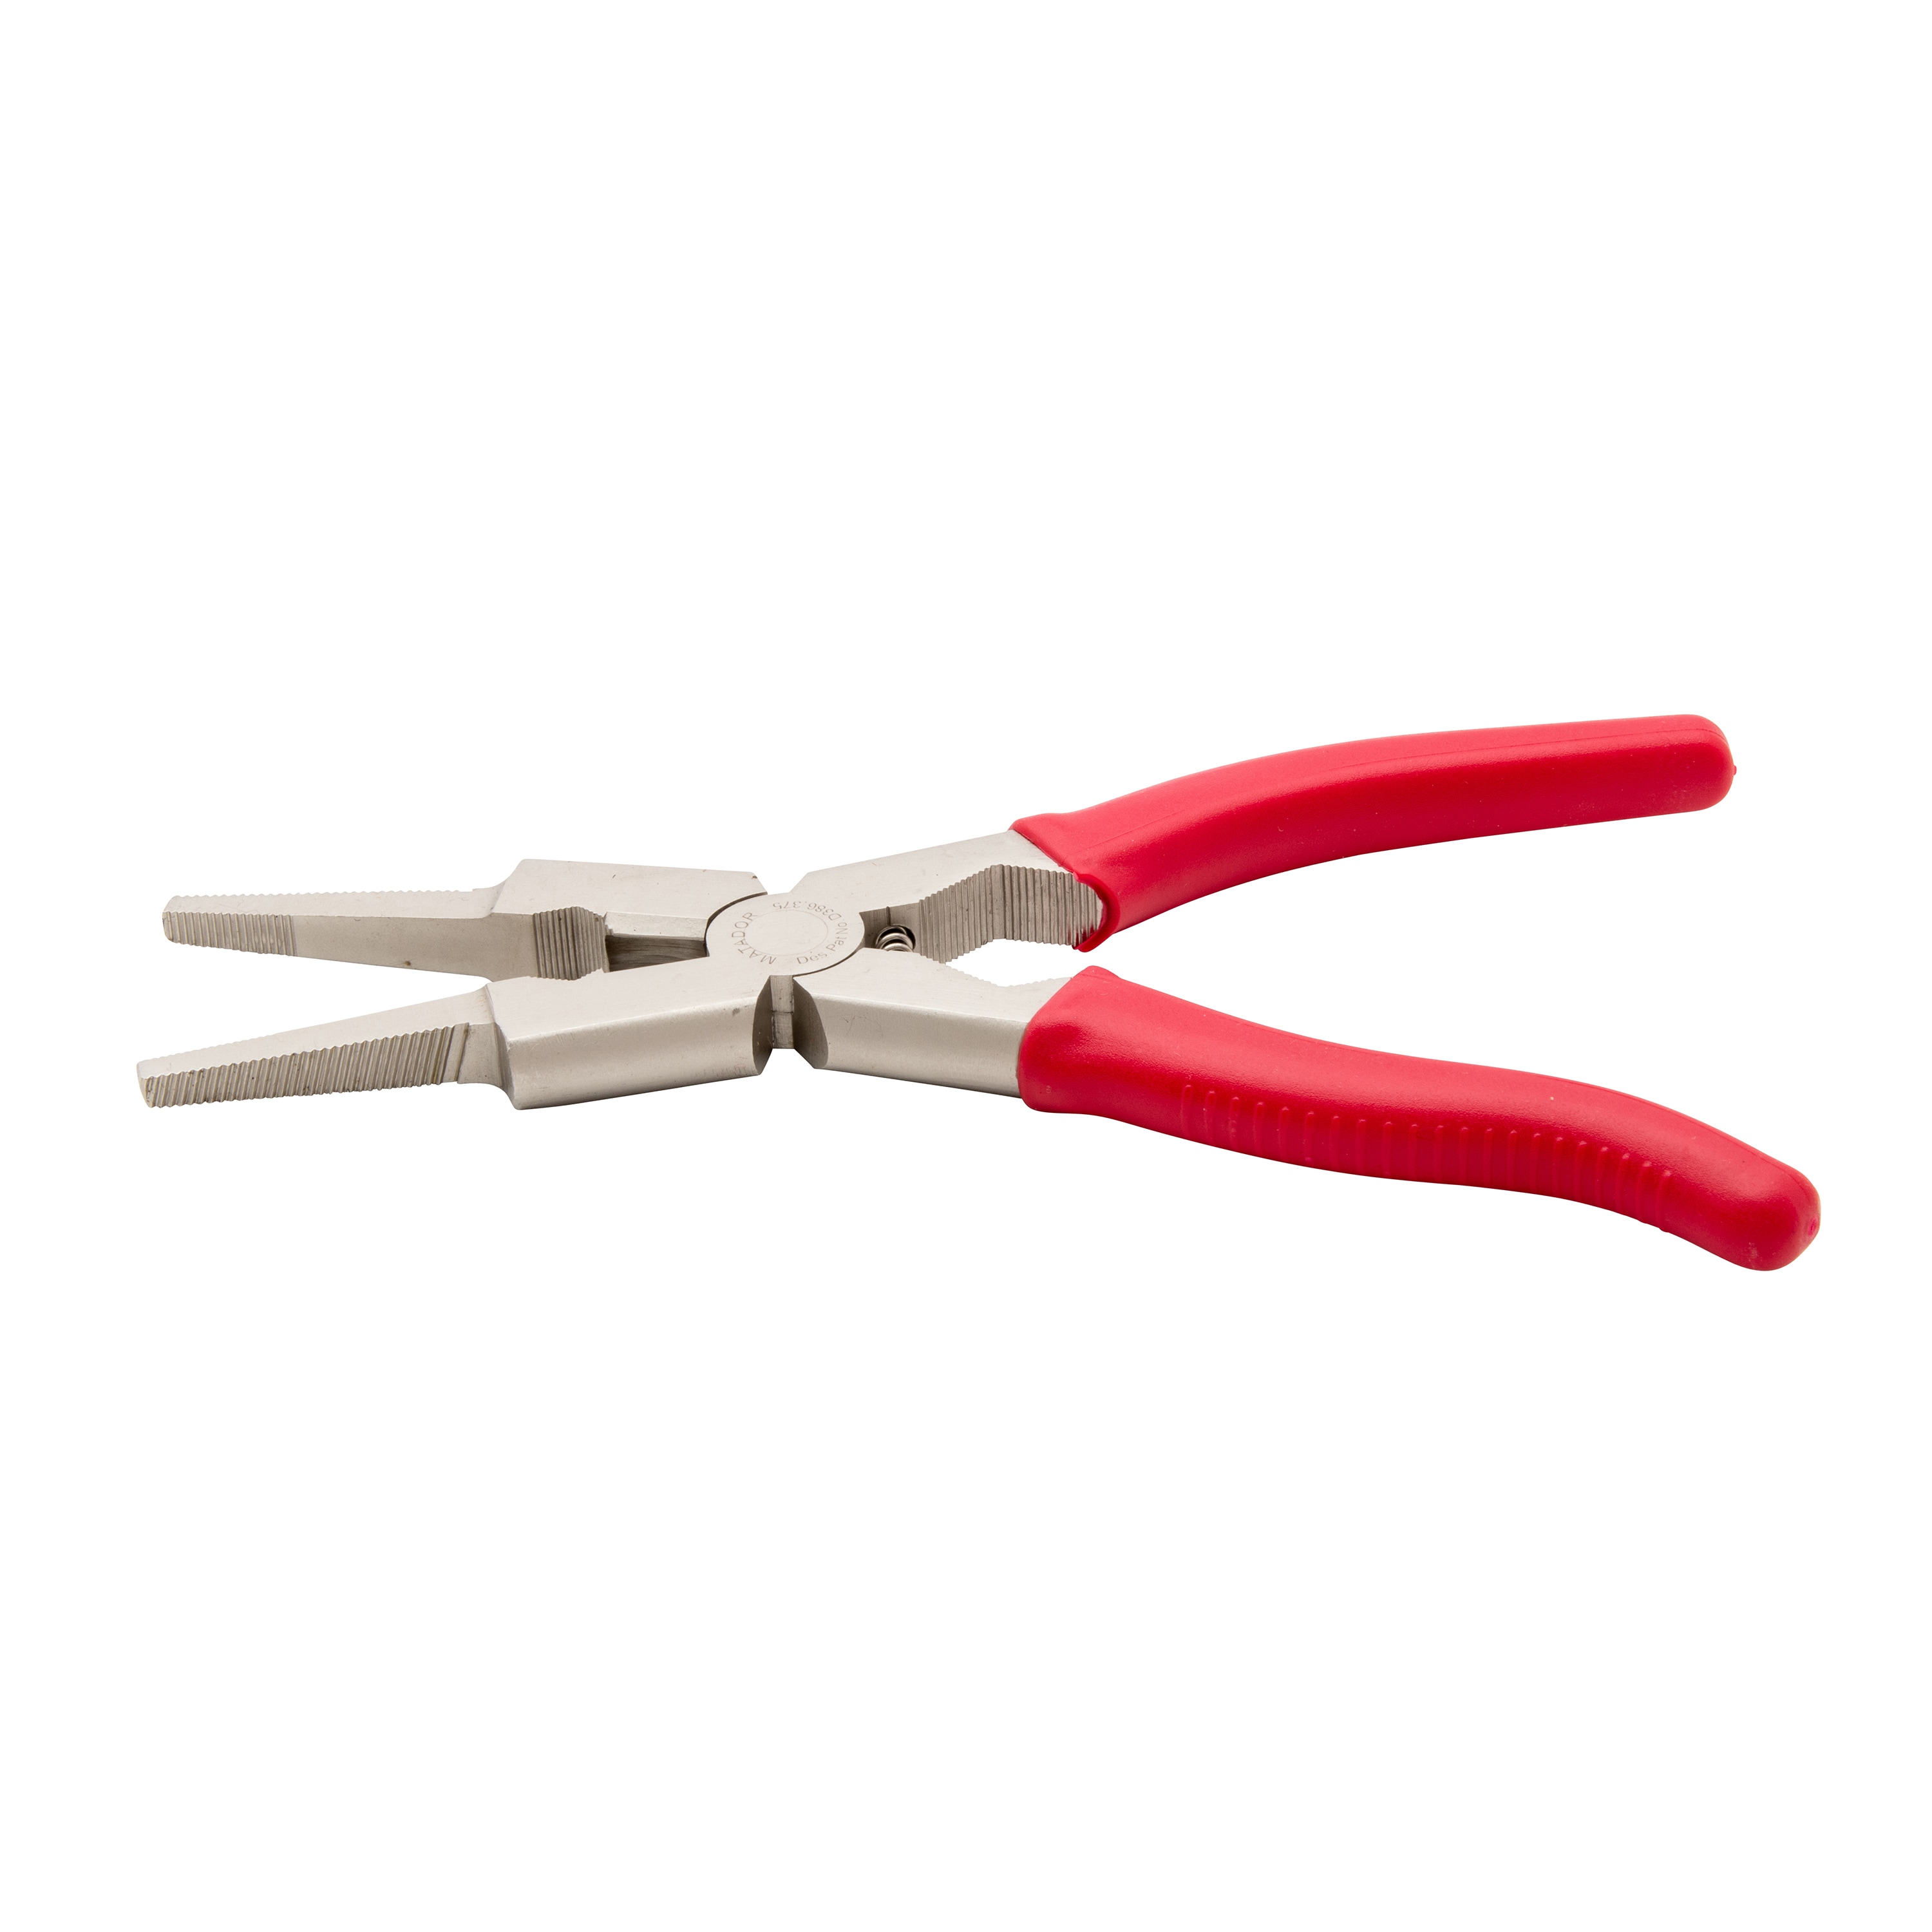 Stainless Steel Tie Hook Pliers Flat Nose Pliers Fishing Pliers Elbow  Pliers Spring Pliers Red Handle Pliers New Gadgets (Red, One Size)